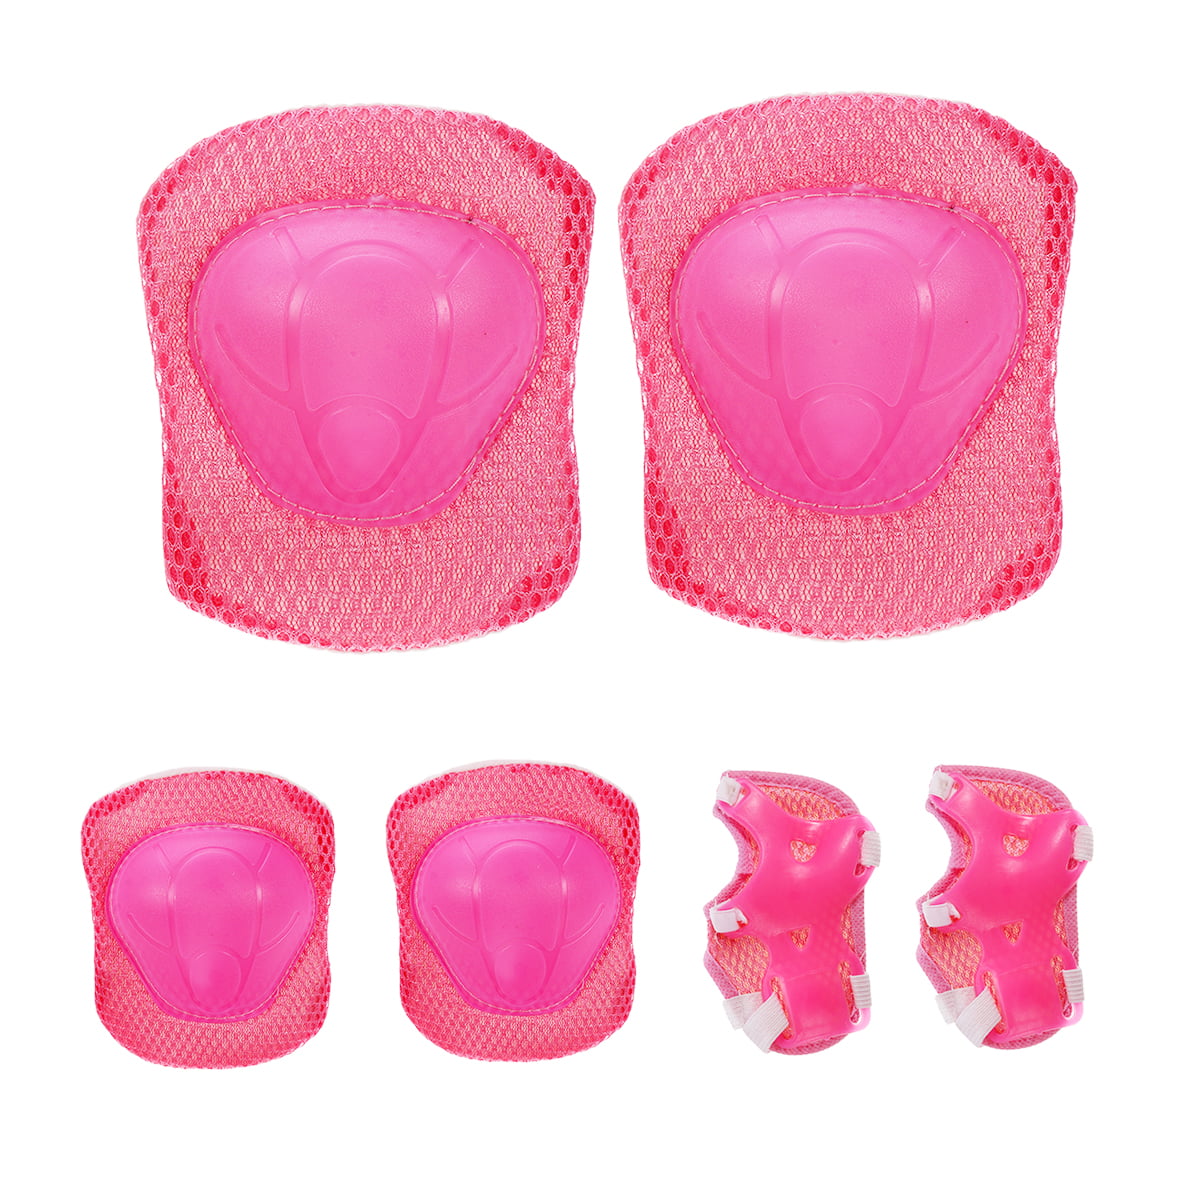 6pcs/pack Children's Protective Safety Gear Pad Kids Wrist Elbow Knee Protectors 